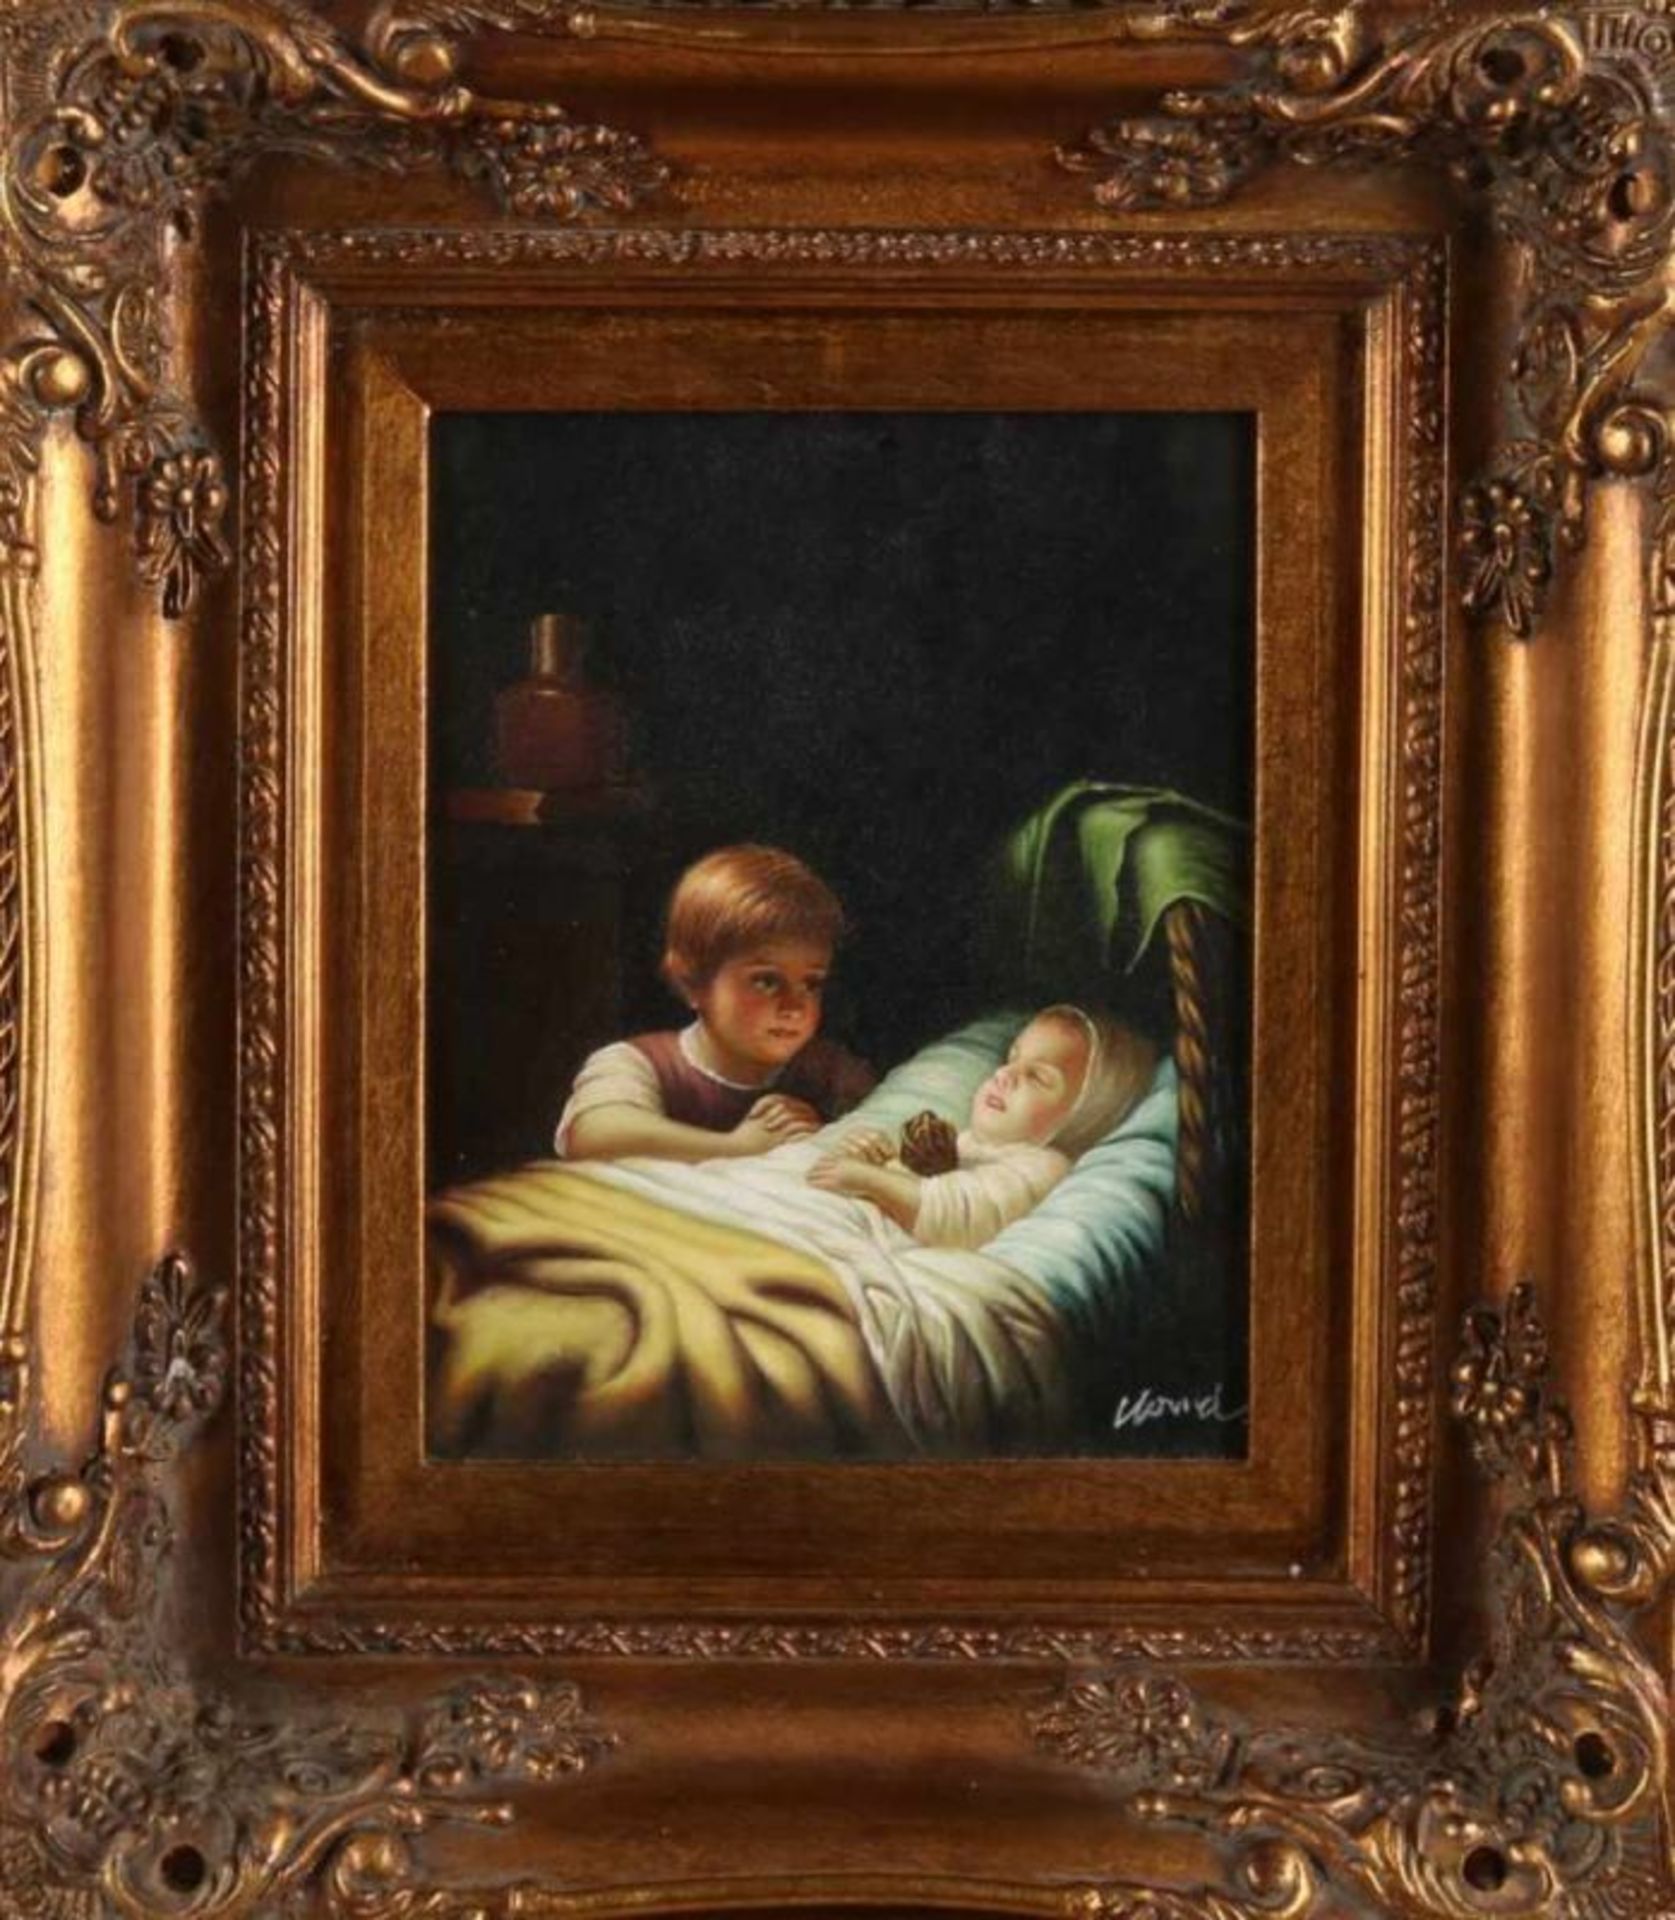 Unclear signed. Second half 20th century. Girl in child in bed. Oil paint on panel. Dimensions: 19